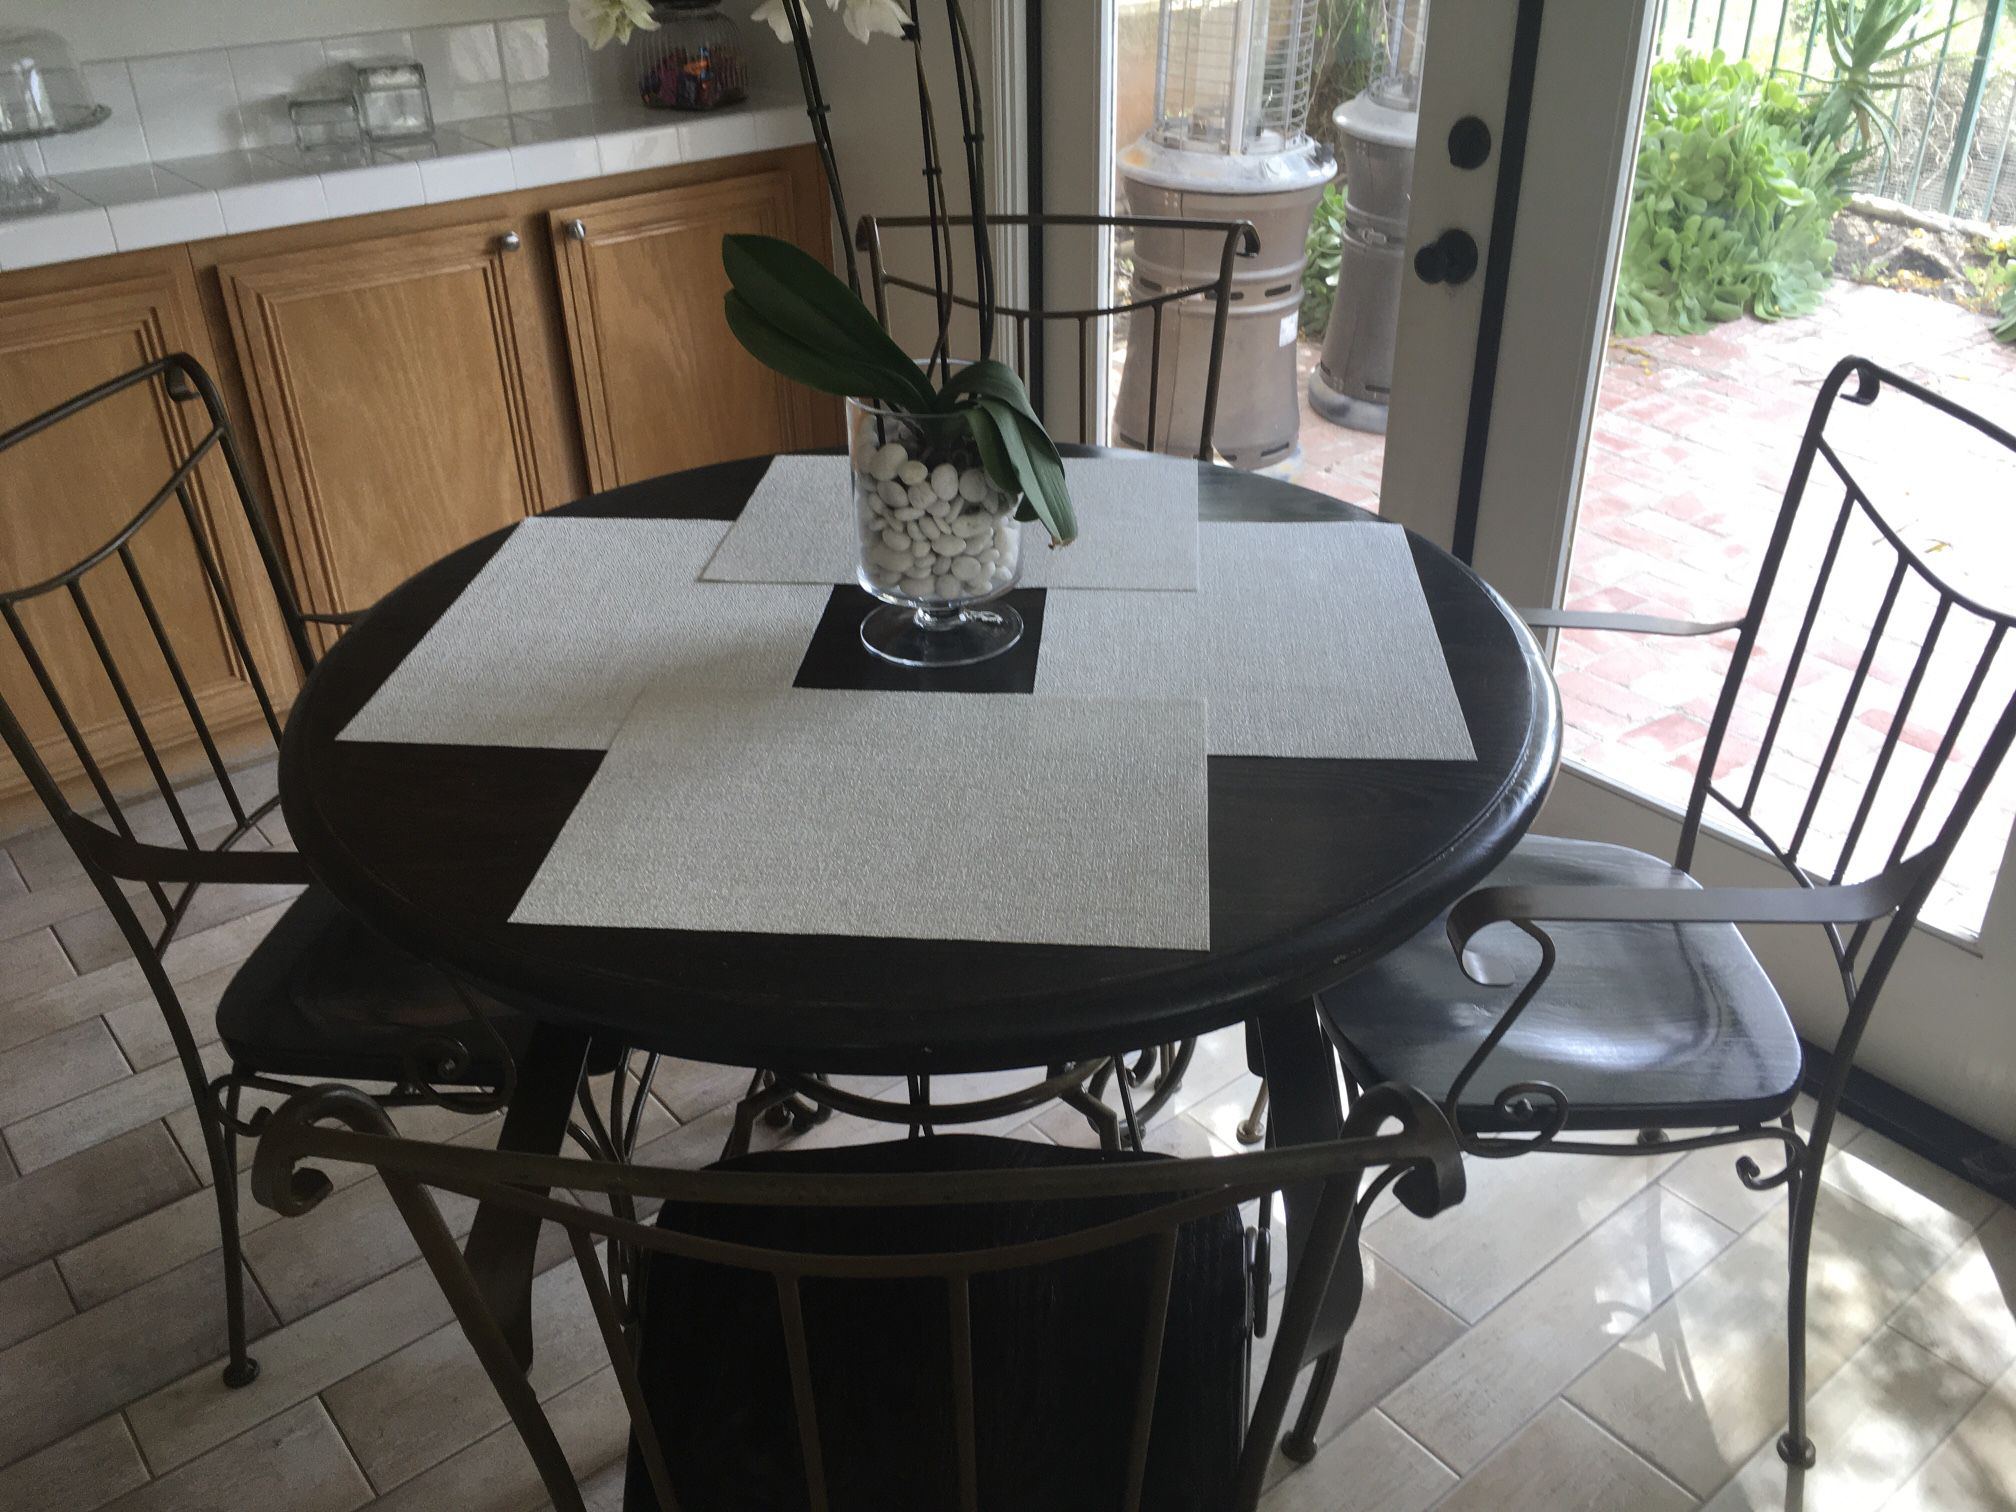 Kitchen Table and Chairs (Wood/Wrought Iron)